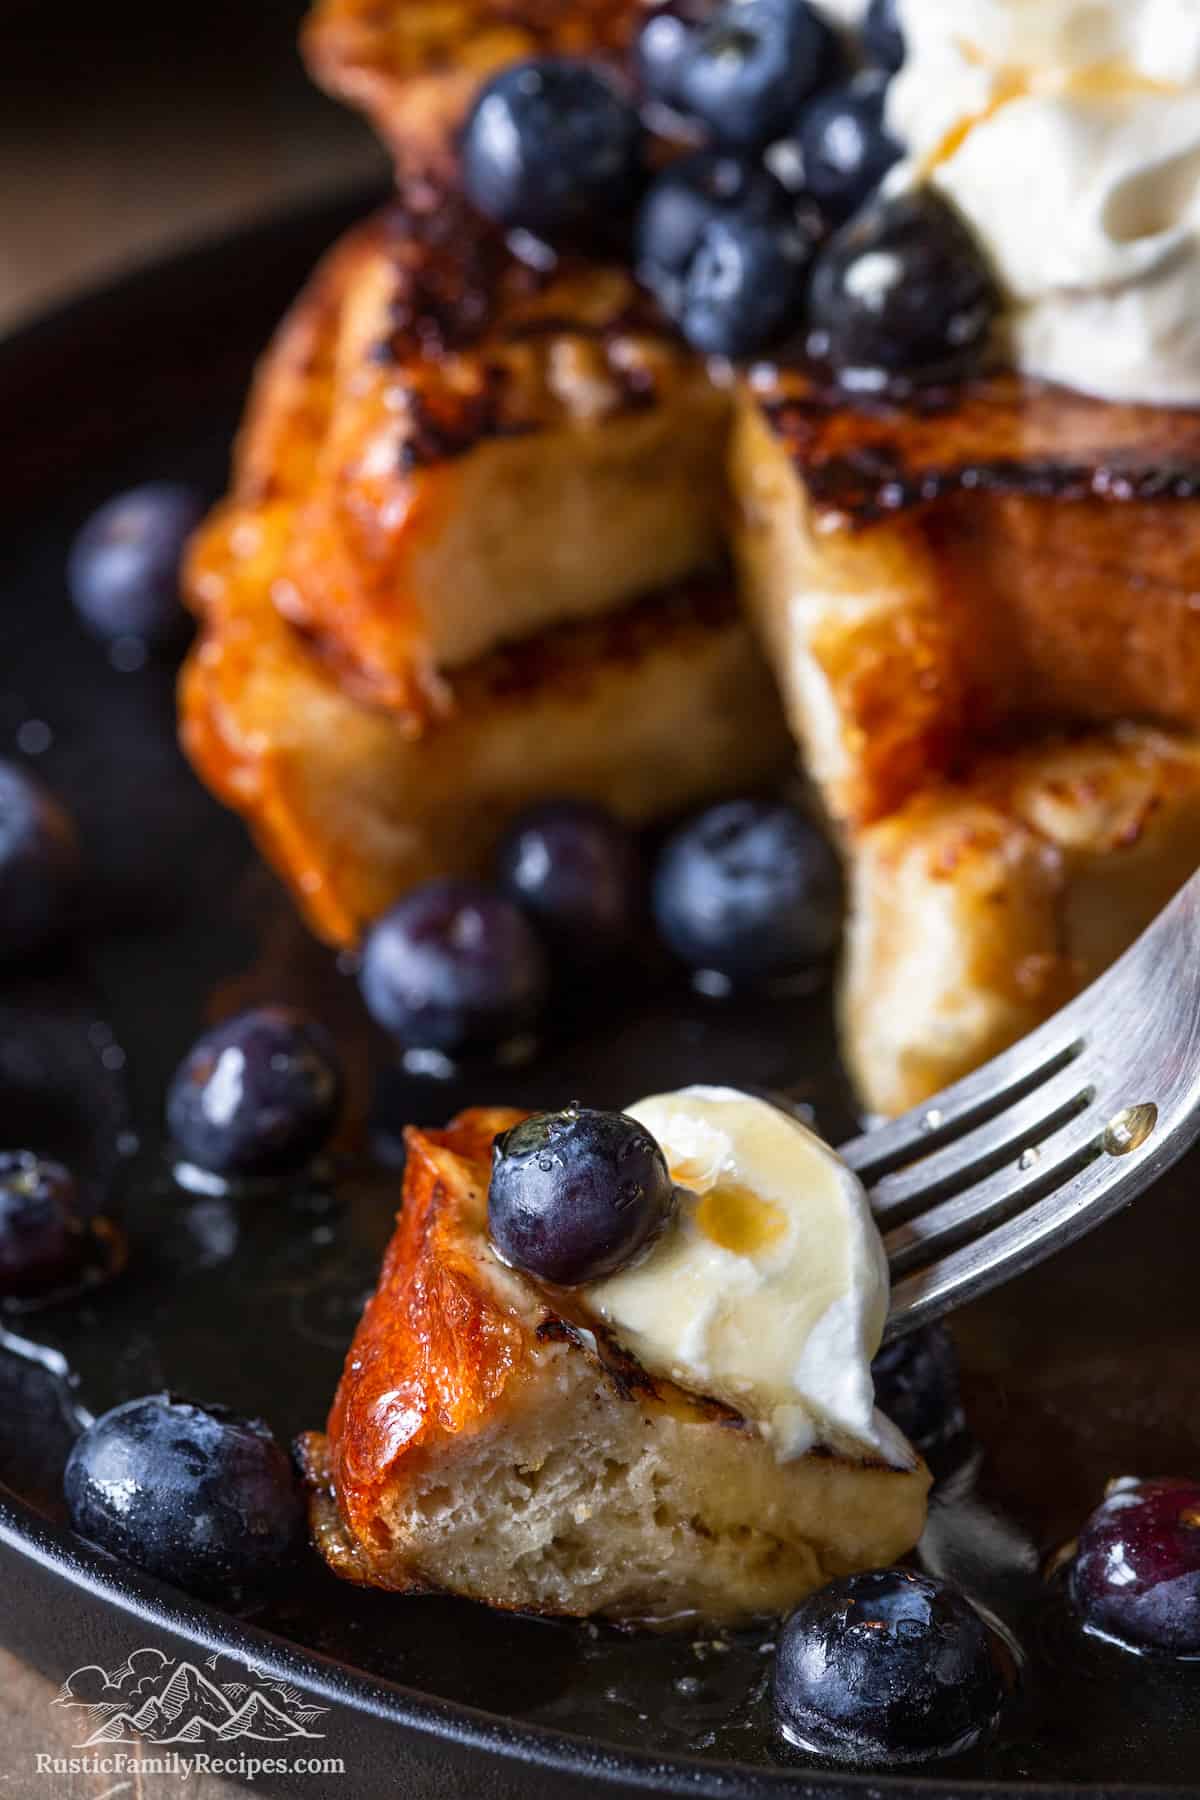 A fork with a bitefull of french toast, whipped cream and blueberries